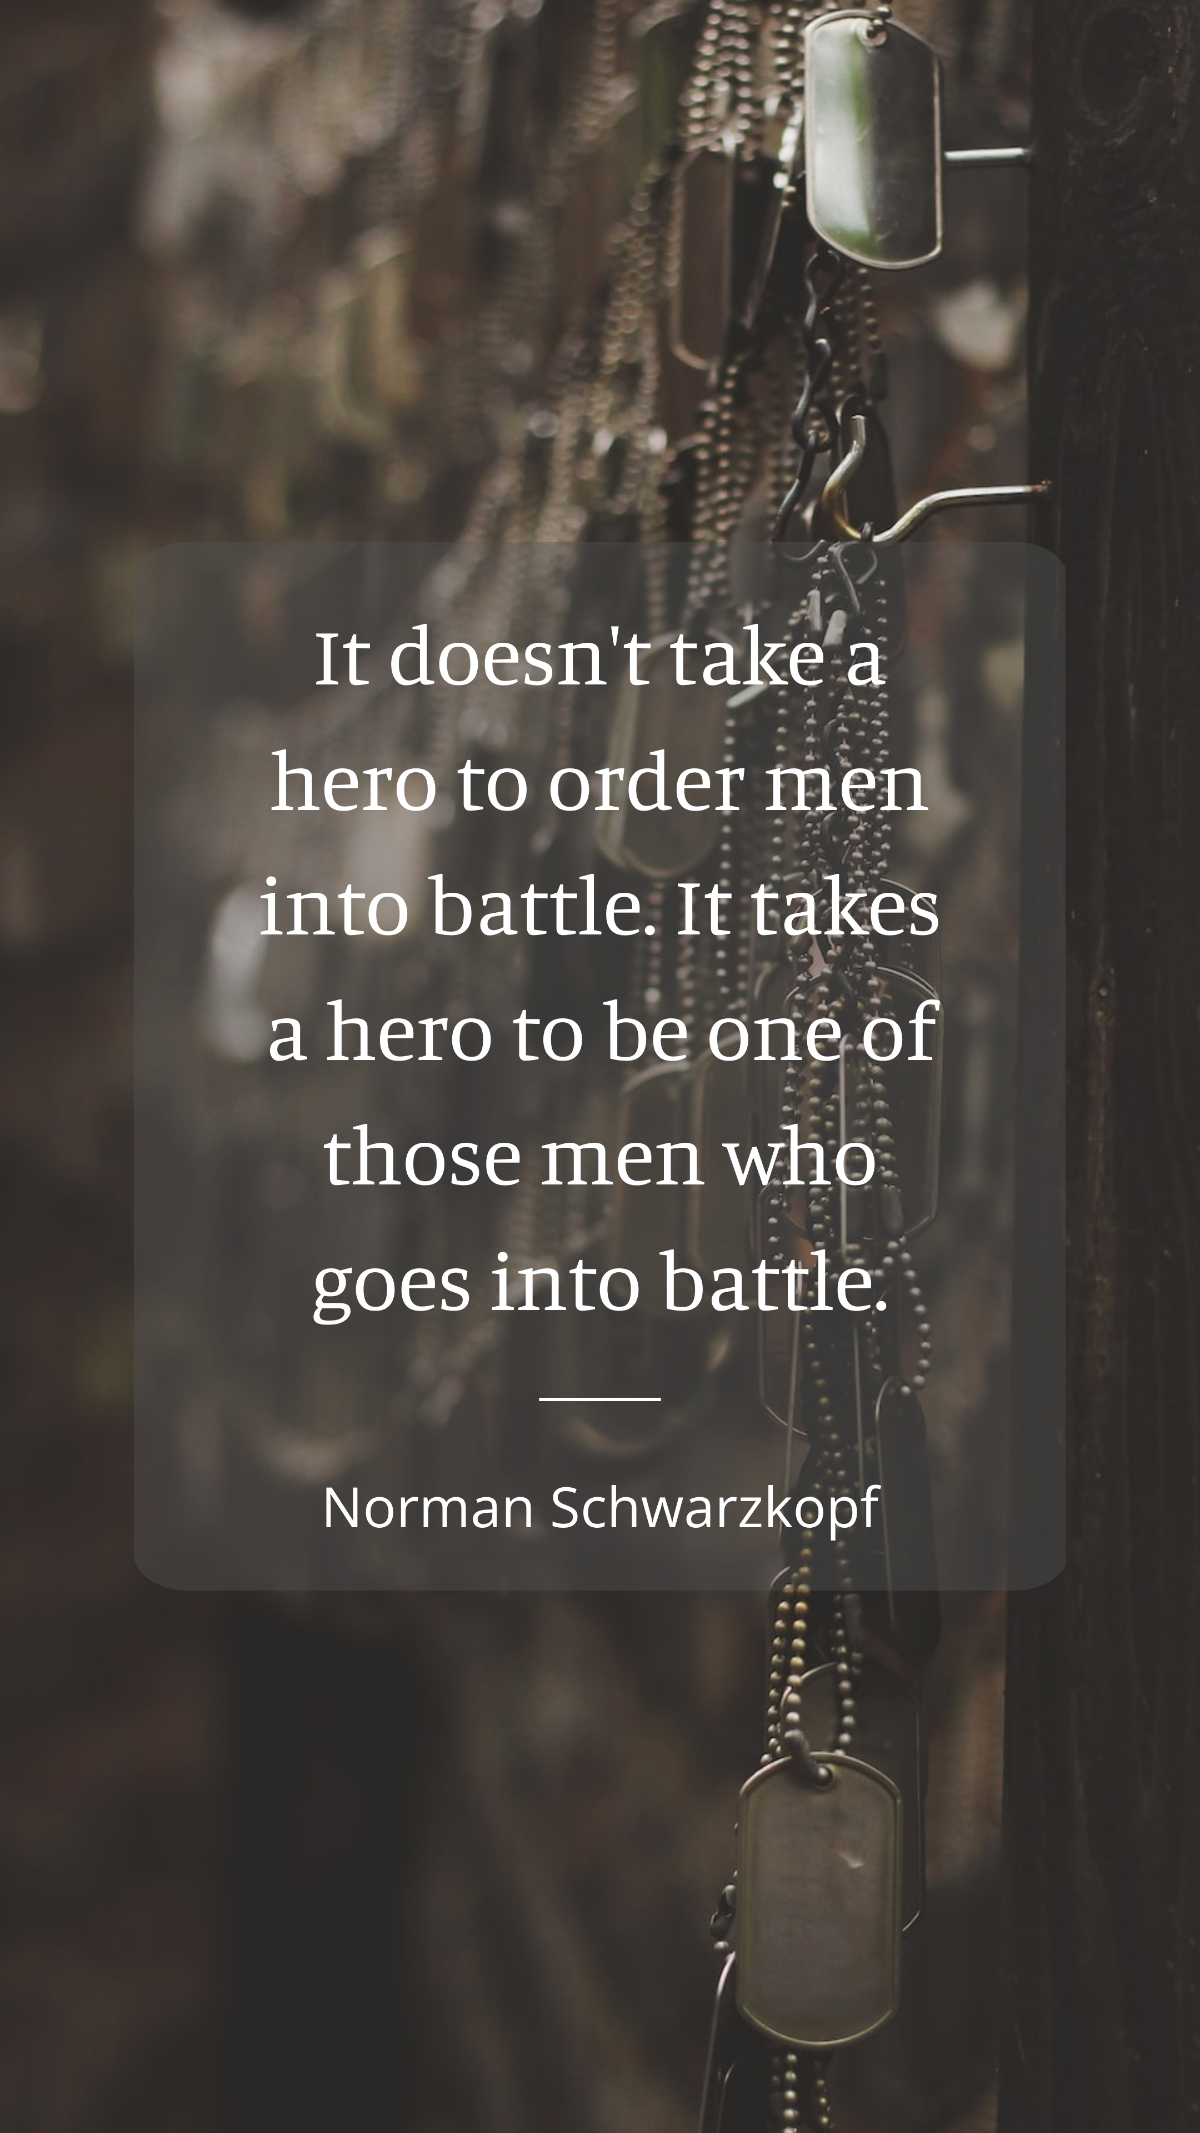 Norman Schwarzkopf - It doesn't take a hero to order men into battle. It takes a hero to be one of those men who goes into battle. Template